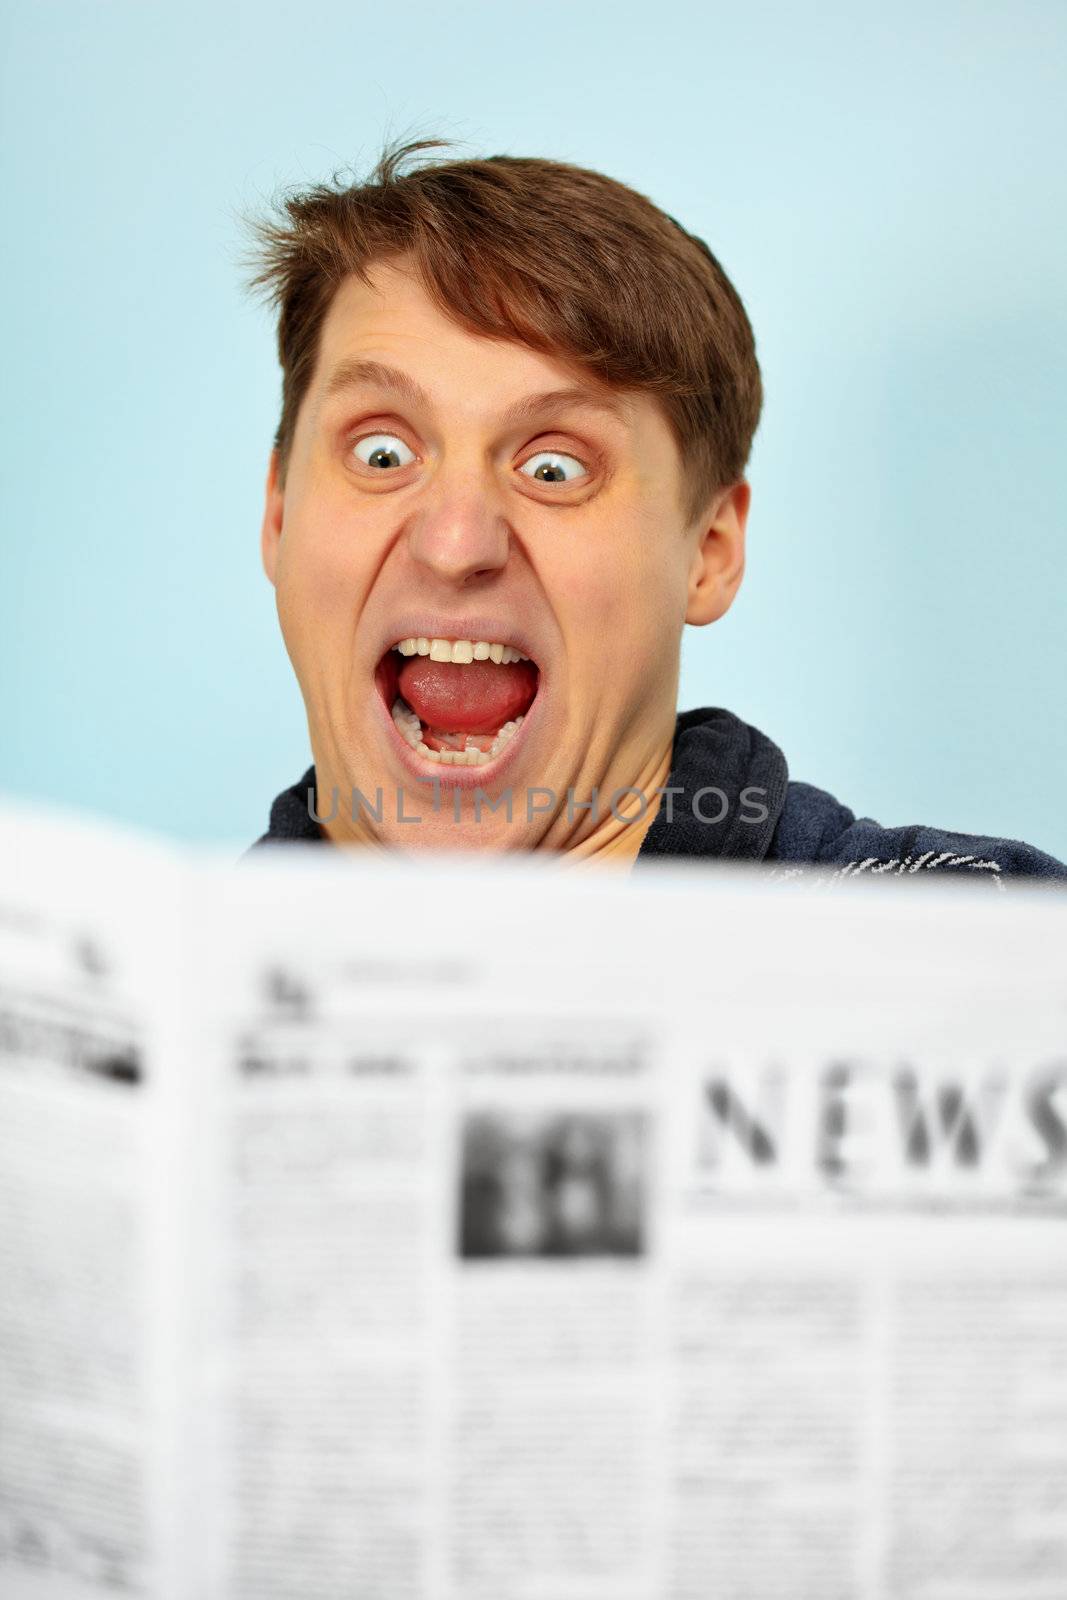 Man shocked - bad news from newspaper by pzaxe